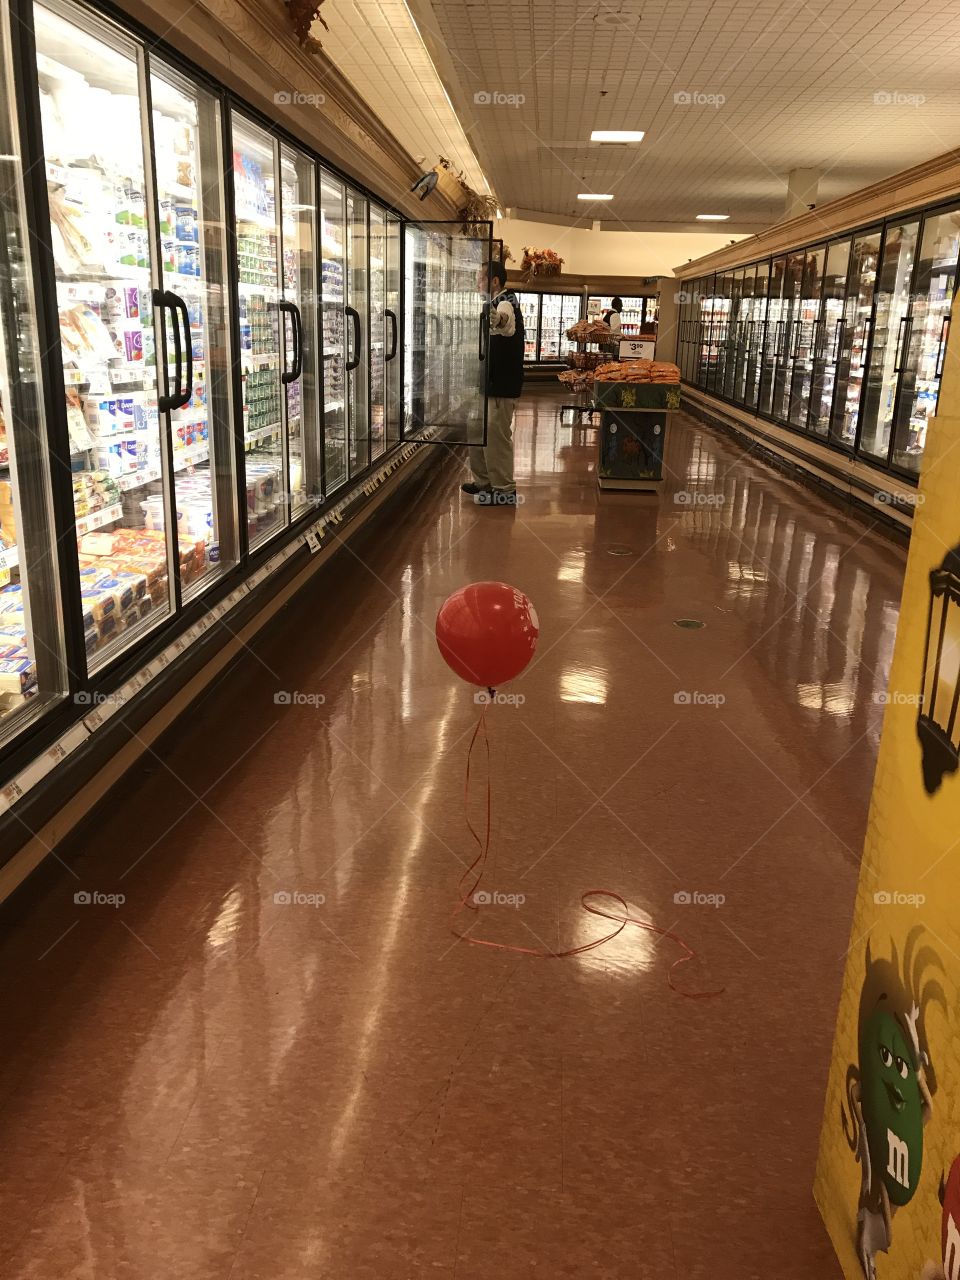 IT visits the grocery